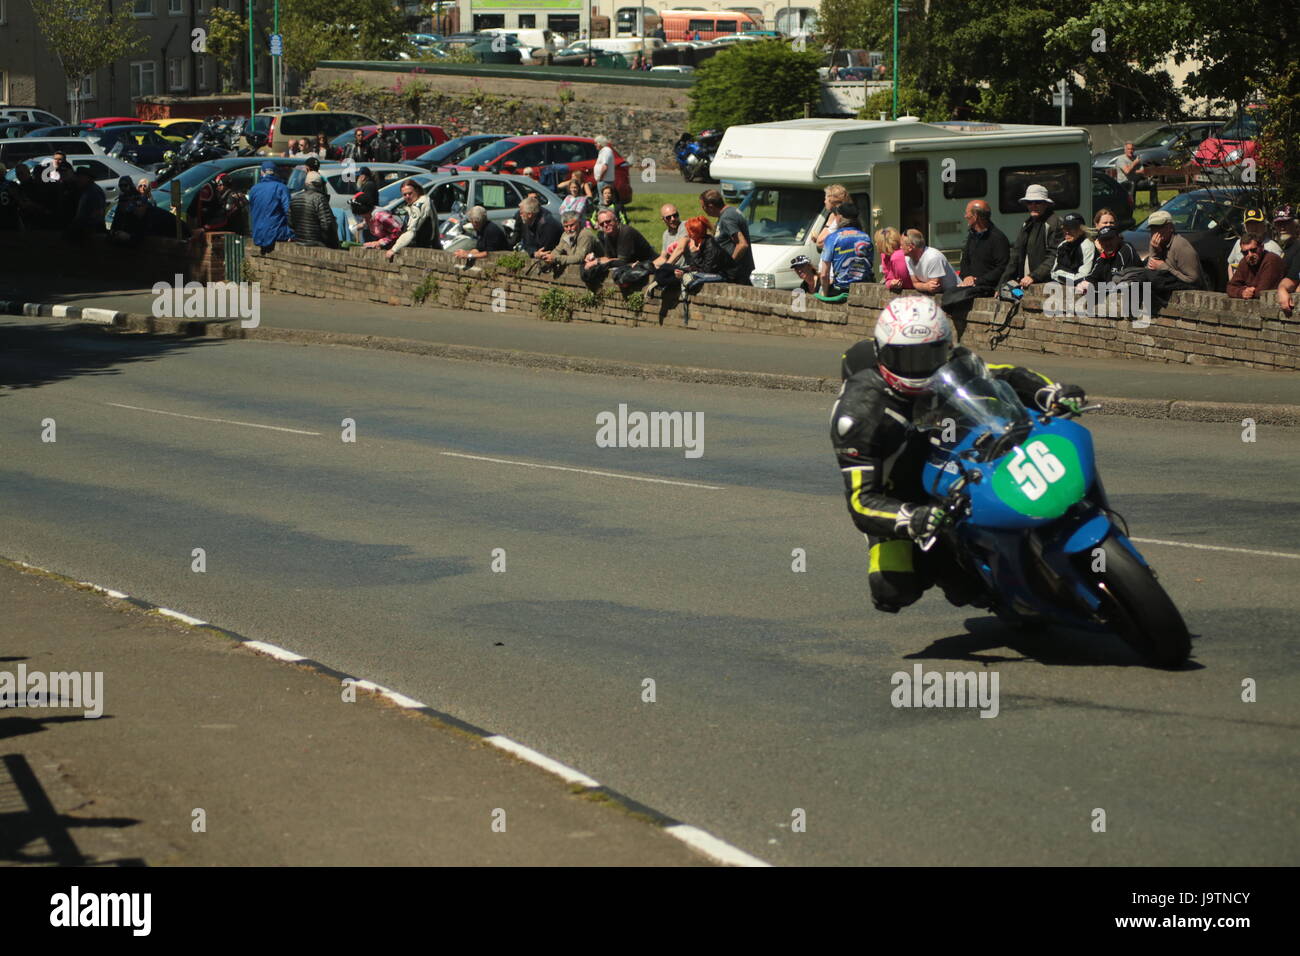 Isle of Man TT Races, Sidecar, Supersport/Lightweight/Newcomers (all classes) Qualifying Session and Practice Race. Saturday, 3 June 2017. Number Forest Dunn on his lightweight Kawasaki of the Forest Dunn Racing Team. Credit: Eclectic Art and Photography/Alamy Live News. Stock Photo